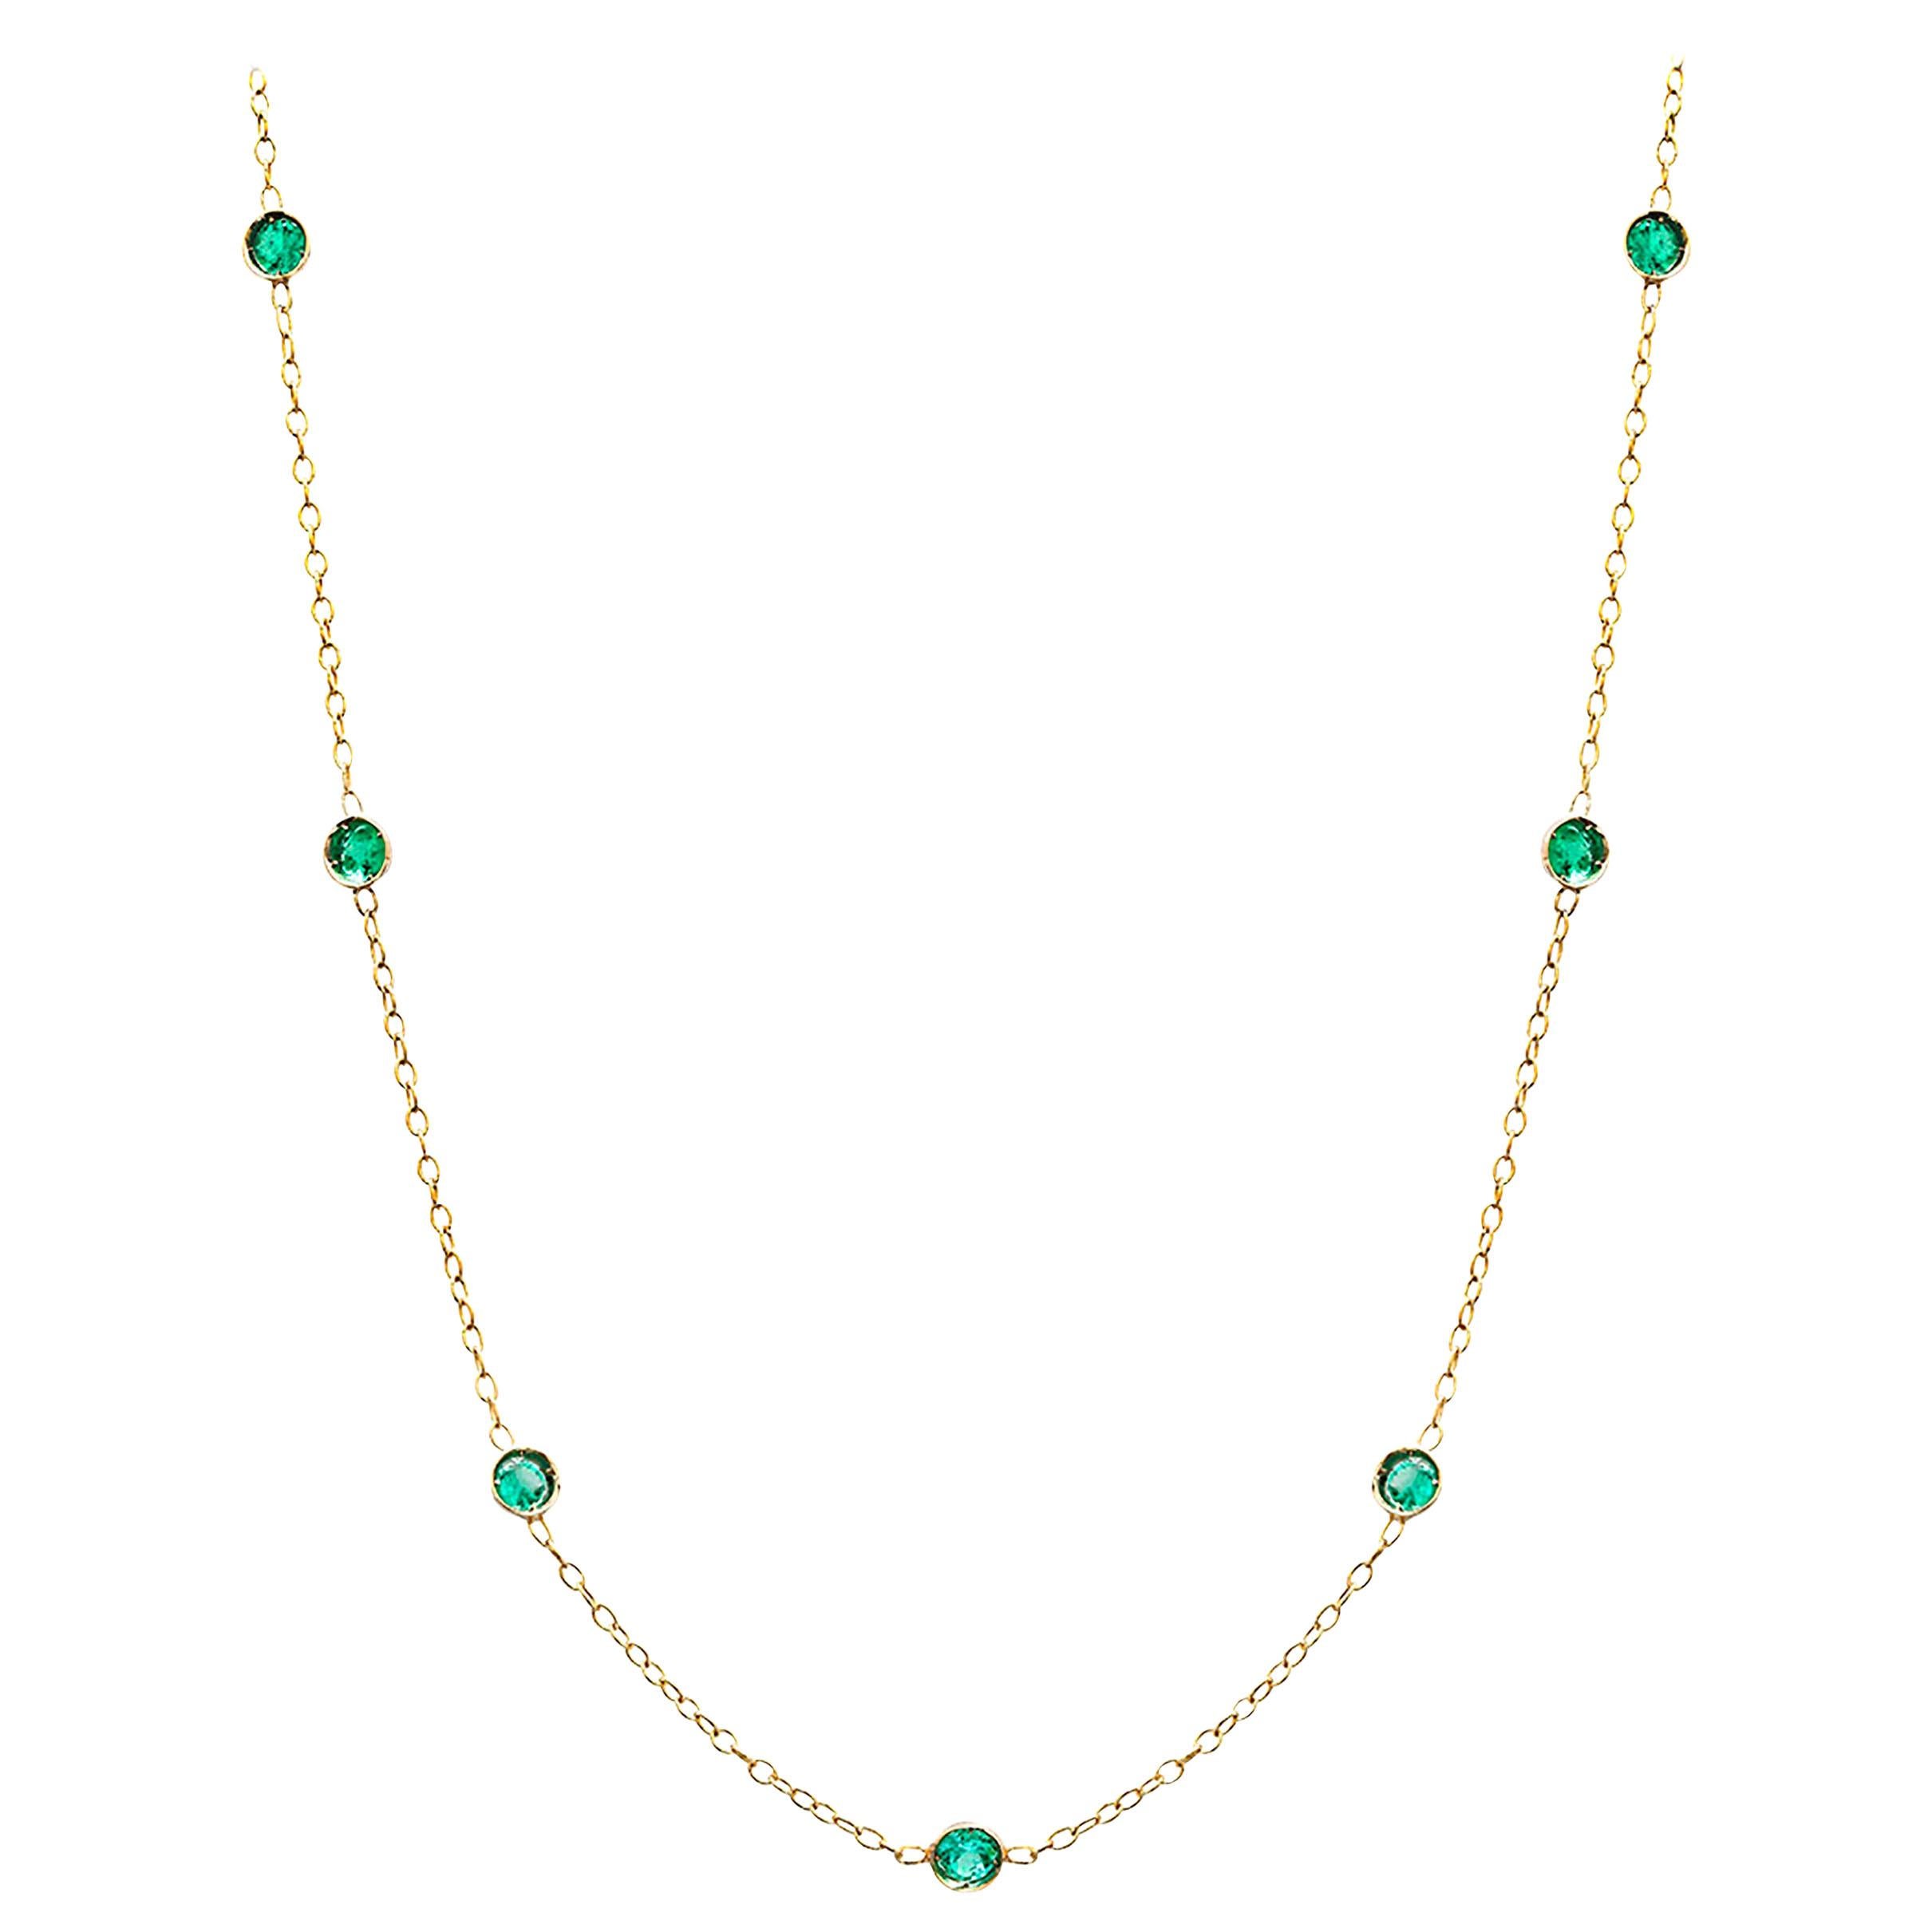 Seven Bezel-Set Emerald in Yellow Gold Necklace Weighing 1.15 Carat